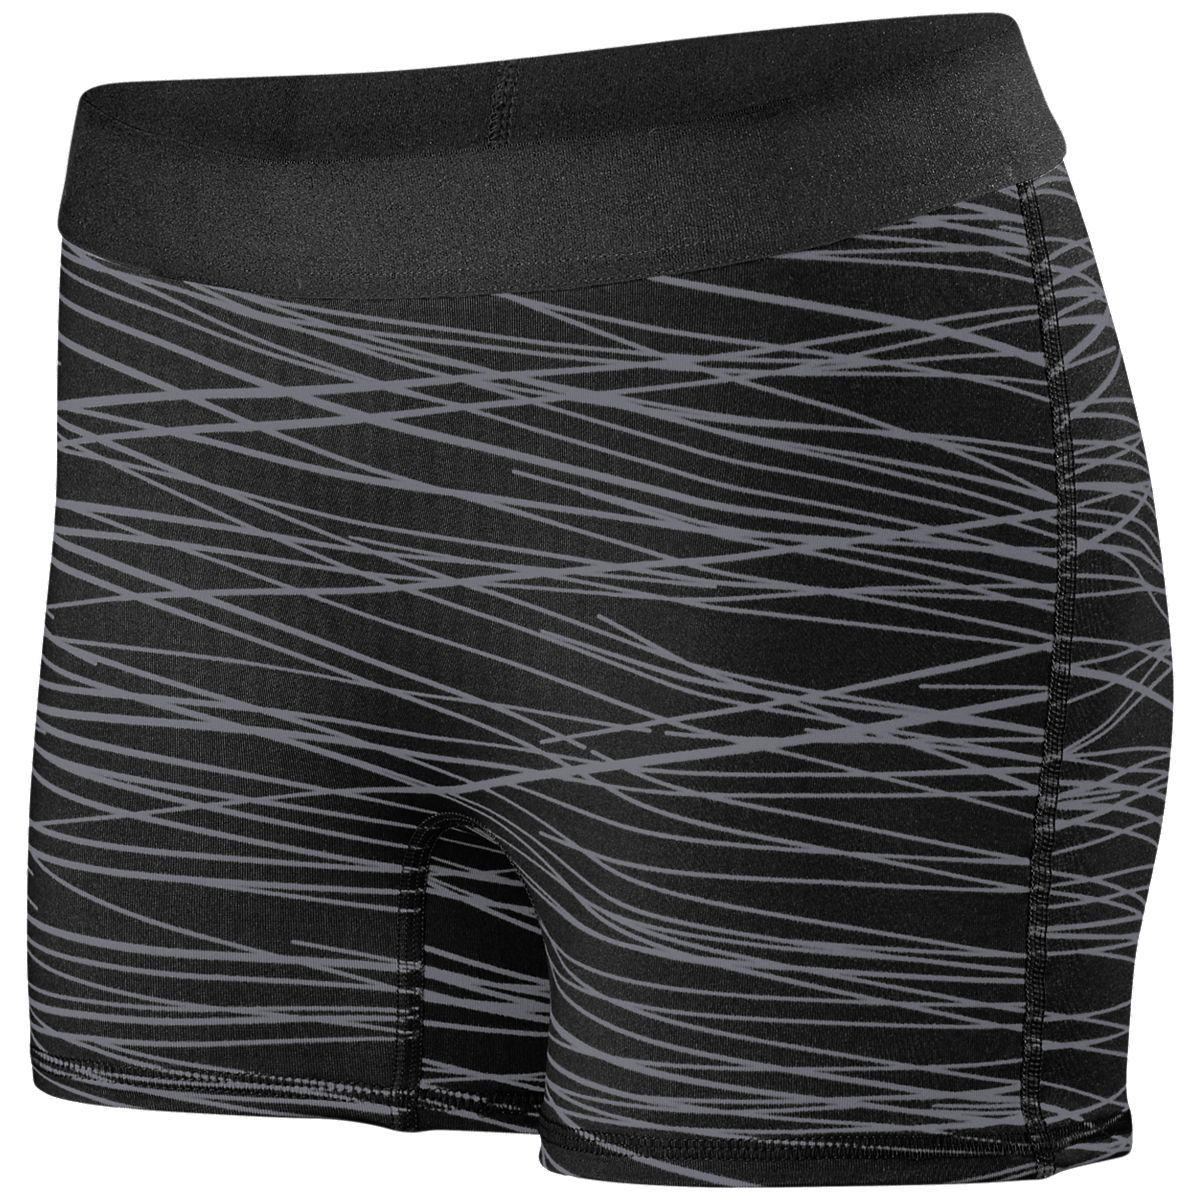 Augusta Sportswear Ladies Hyperform Fitted Shorts in Black/Graphite Print  -Part of the Ladies, Ladies-Shorts, Augusta-Products product lines at KanaleyCreations.com